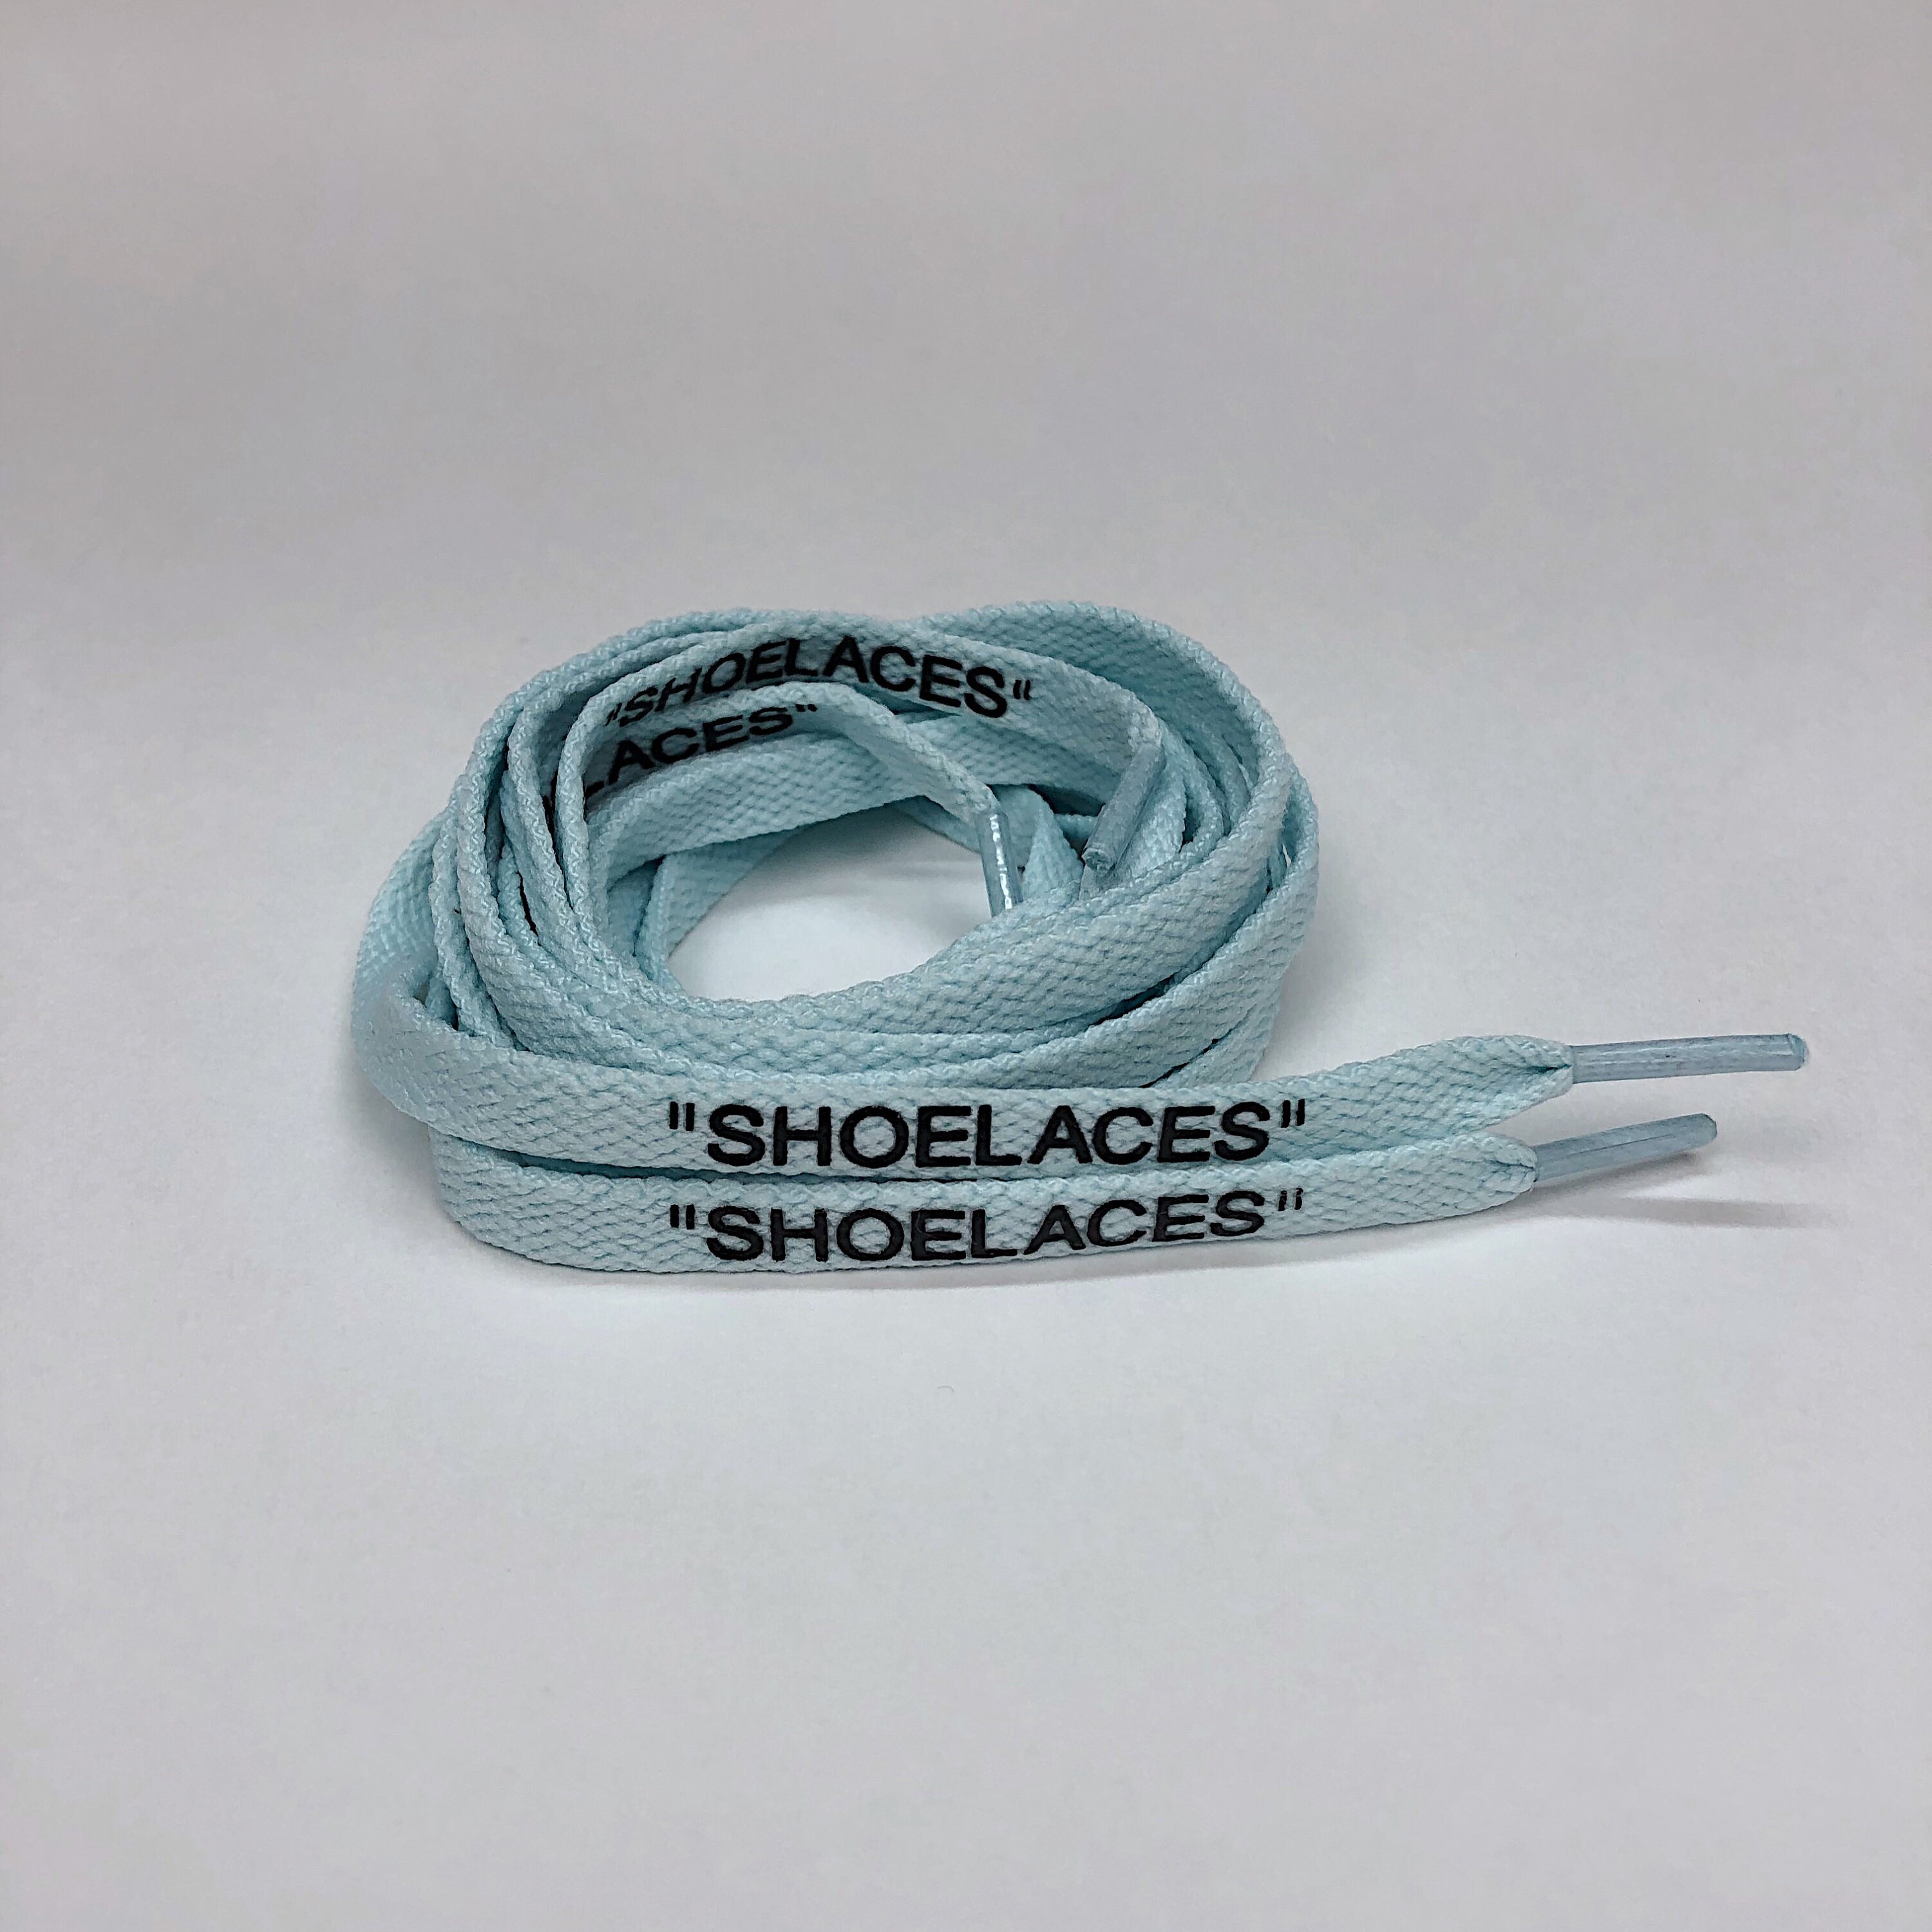 51" and 62" Off-White wax tip shoelaces 